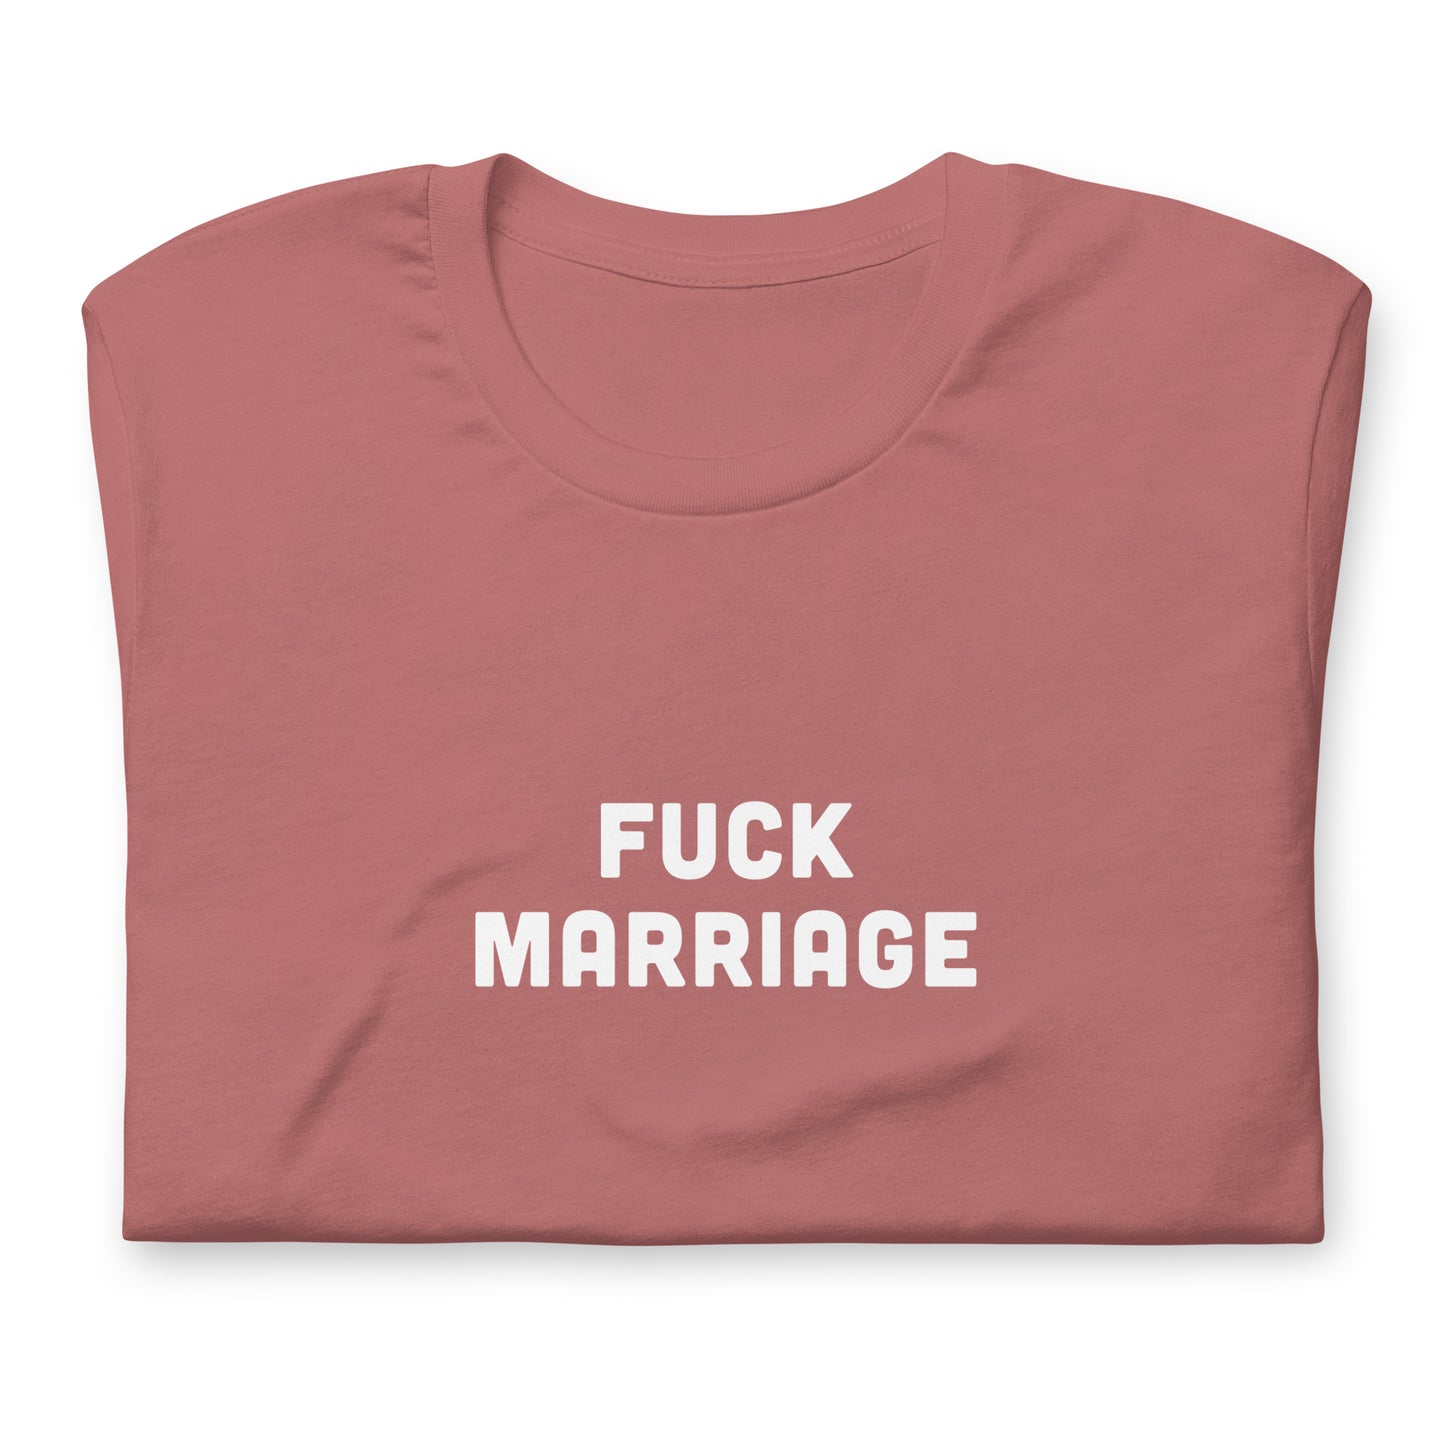 Fuck Marriage T-Shirt Size 2XL Color Navy